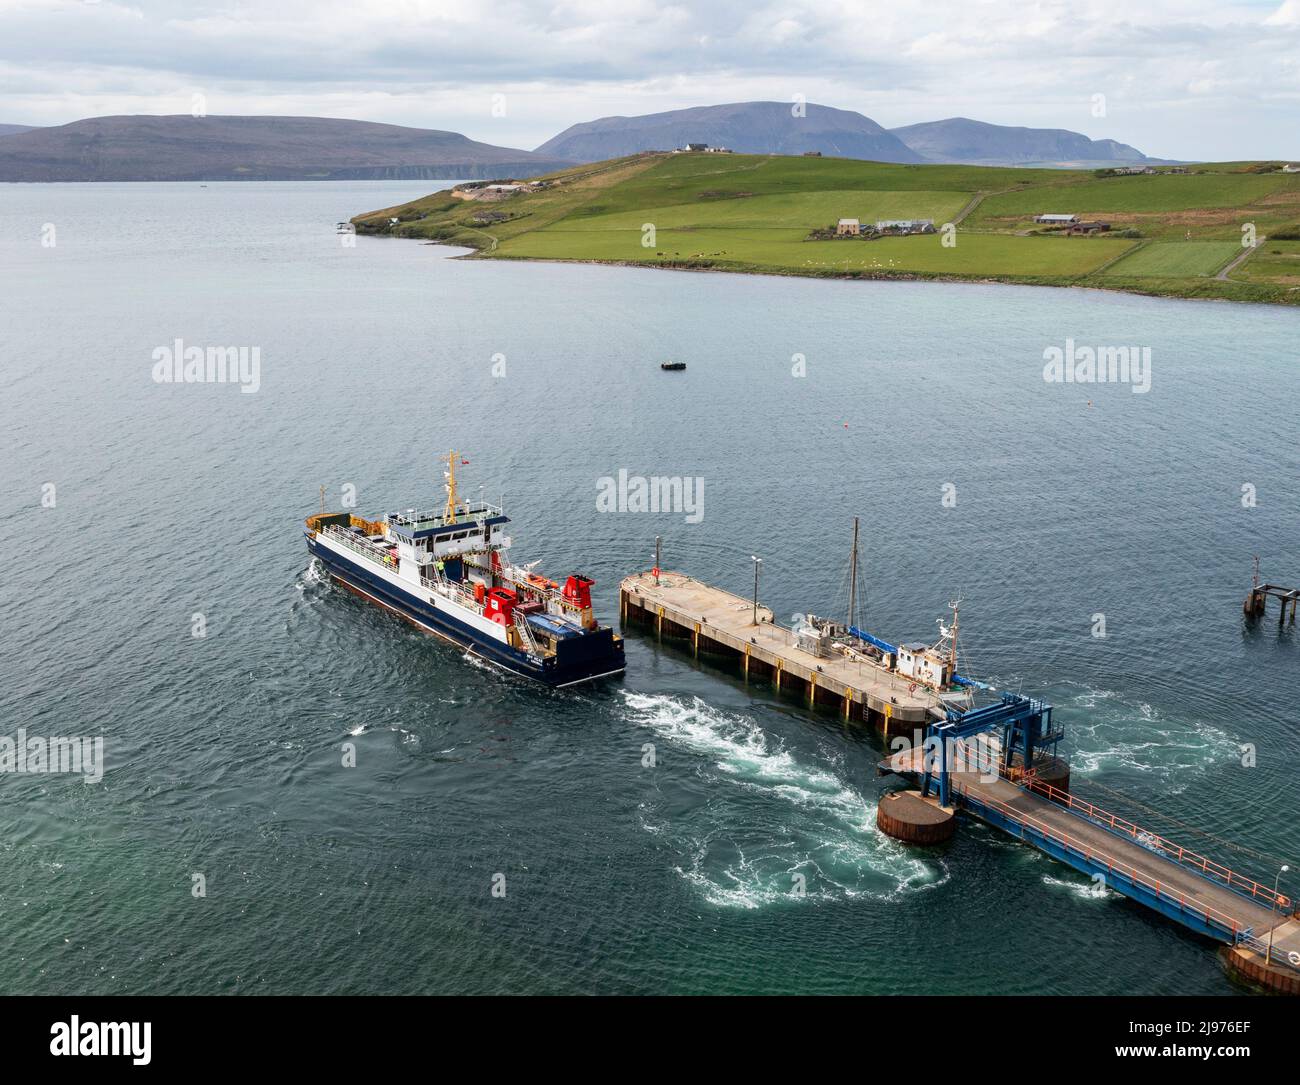 MV Hoy Head ferry departing from Houton Pier, Orkney Mainland, The ferry links the mainland with the islands of Hoy, Flotta and South Walls. Stock Photo